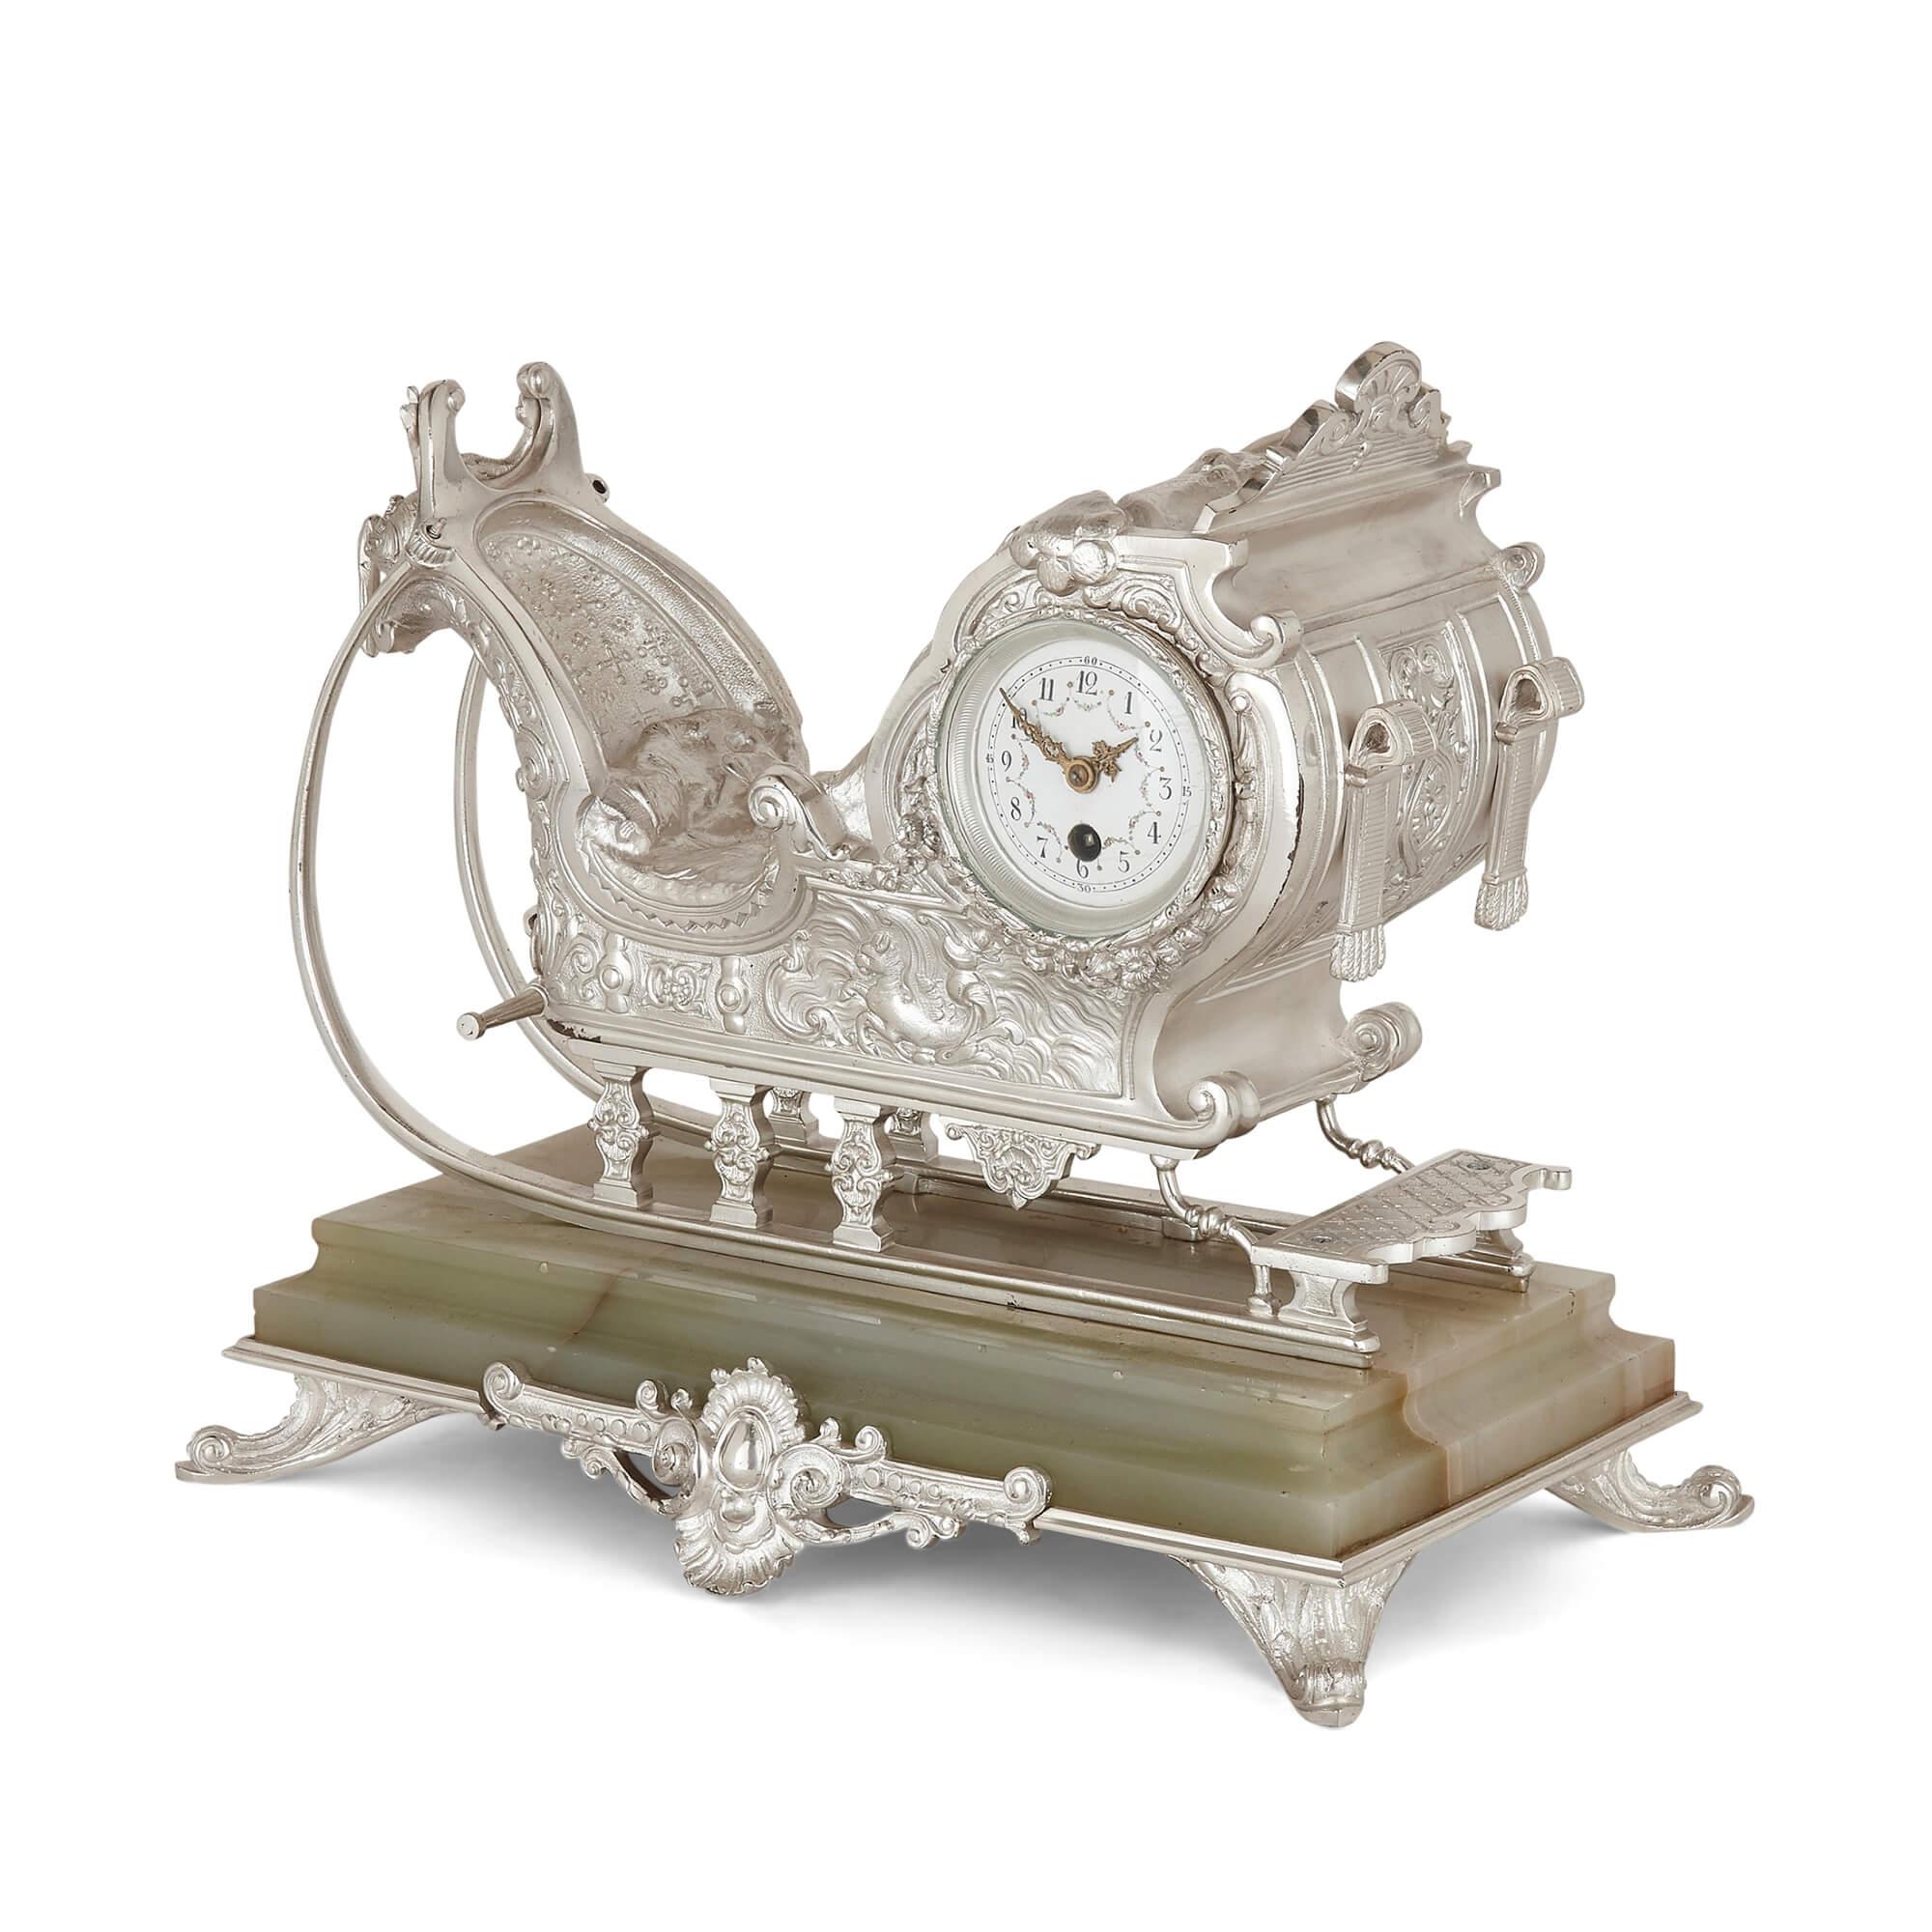 Sleigh-form silvered bronze and green onyx mantel clock
French, late 19th century
Measures: Height 27cm, width 32cm, depth 29cm

This beautiful and unusual clock is formed as a silvered bronze sleigh, which is set upon a rectangular block of